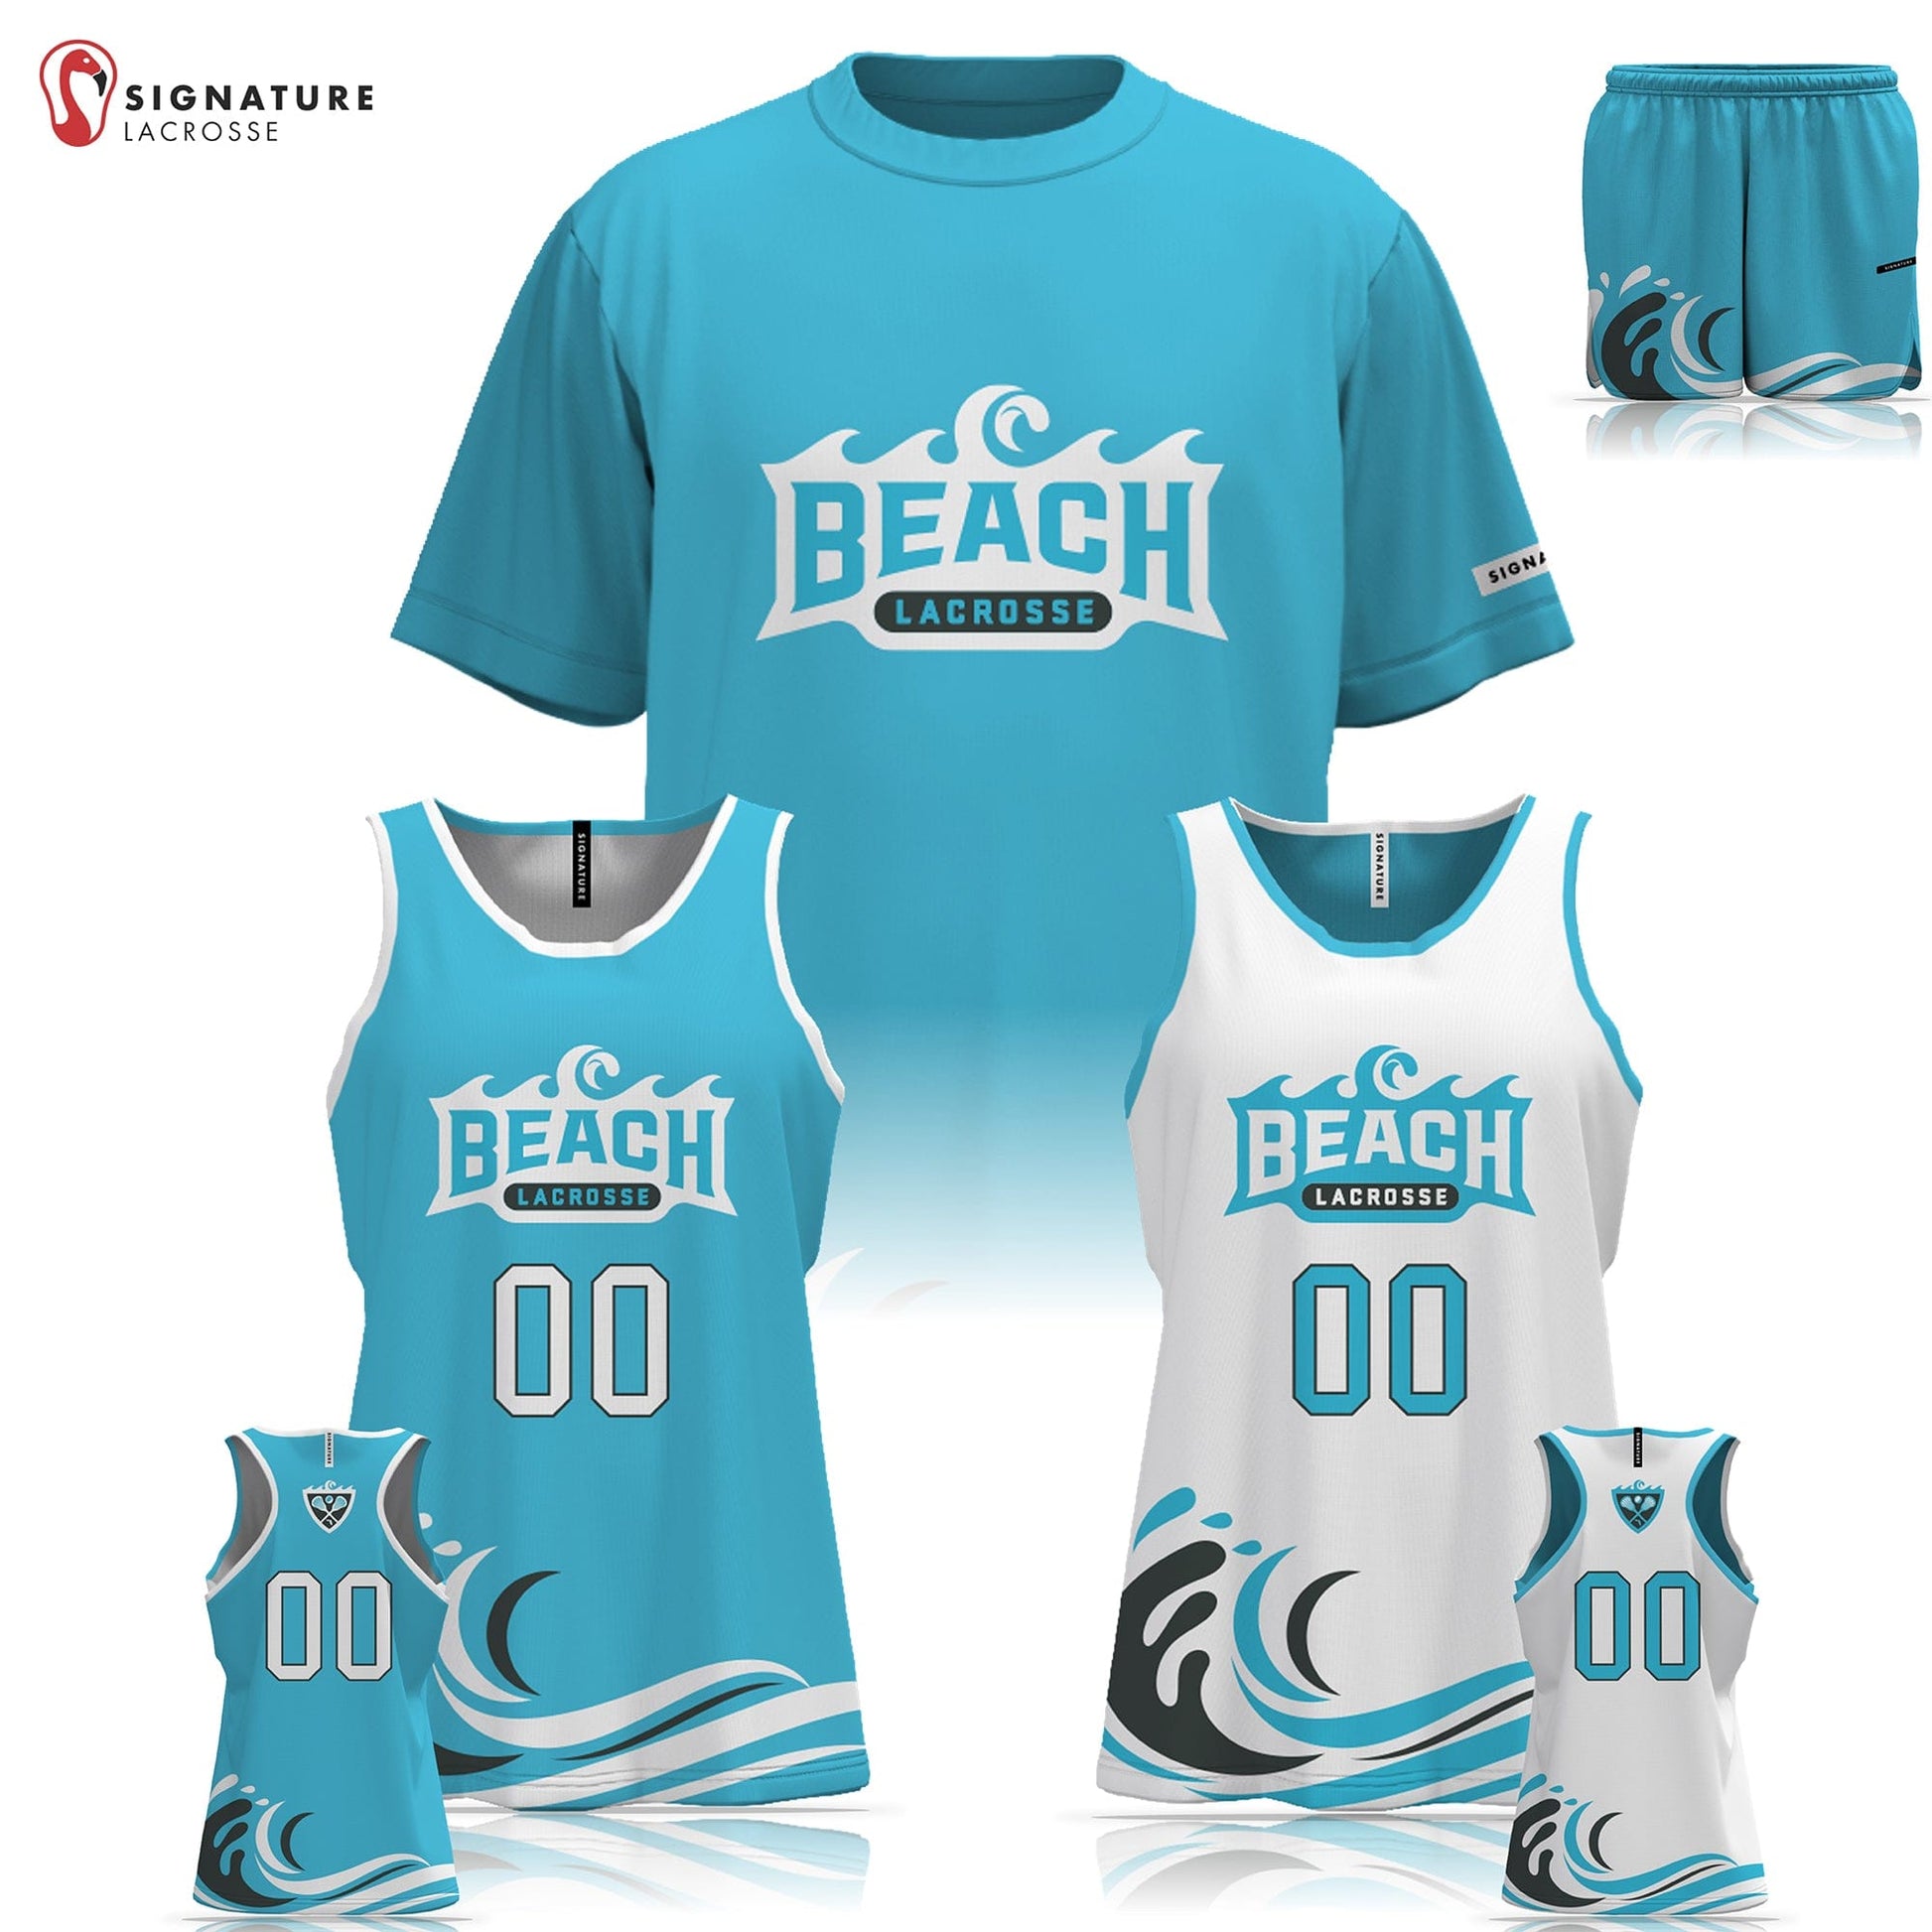 Beach Lacrosse Women's 3 Piece Player Game Package Signature Lacrosse